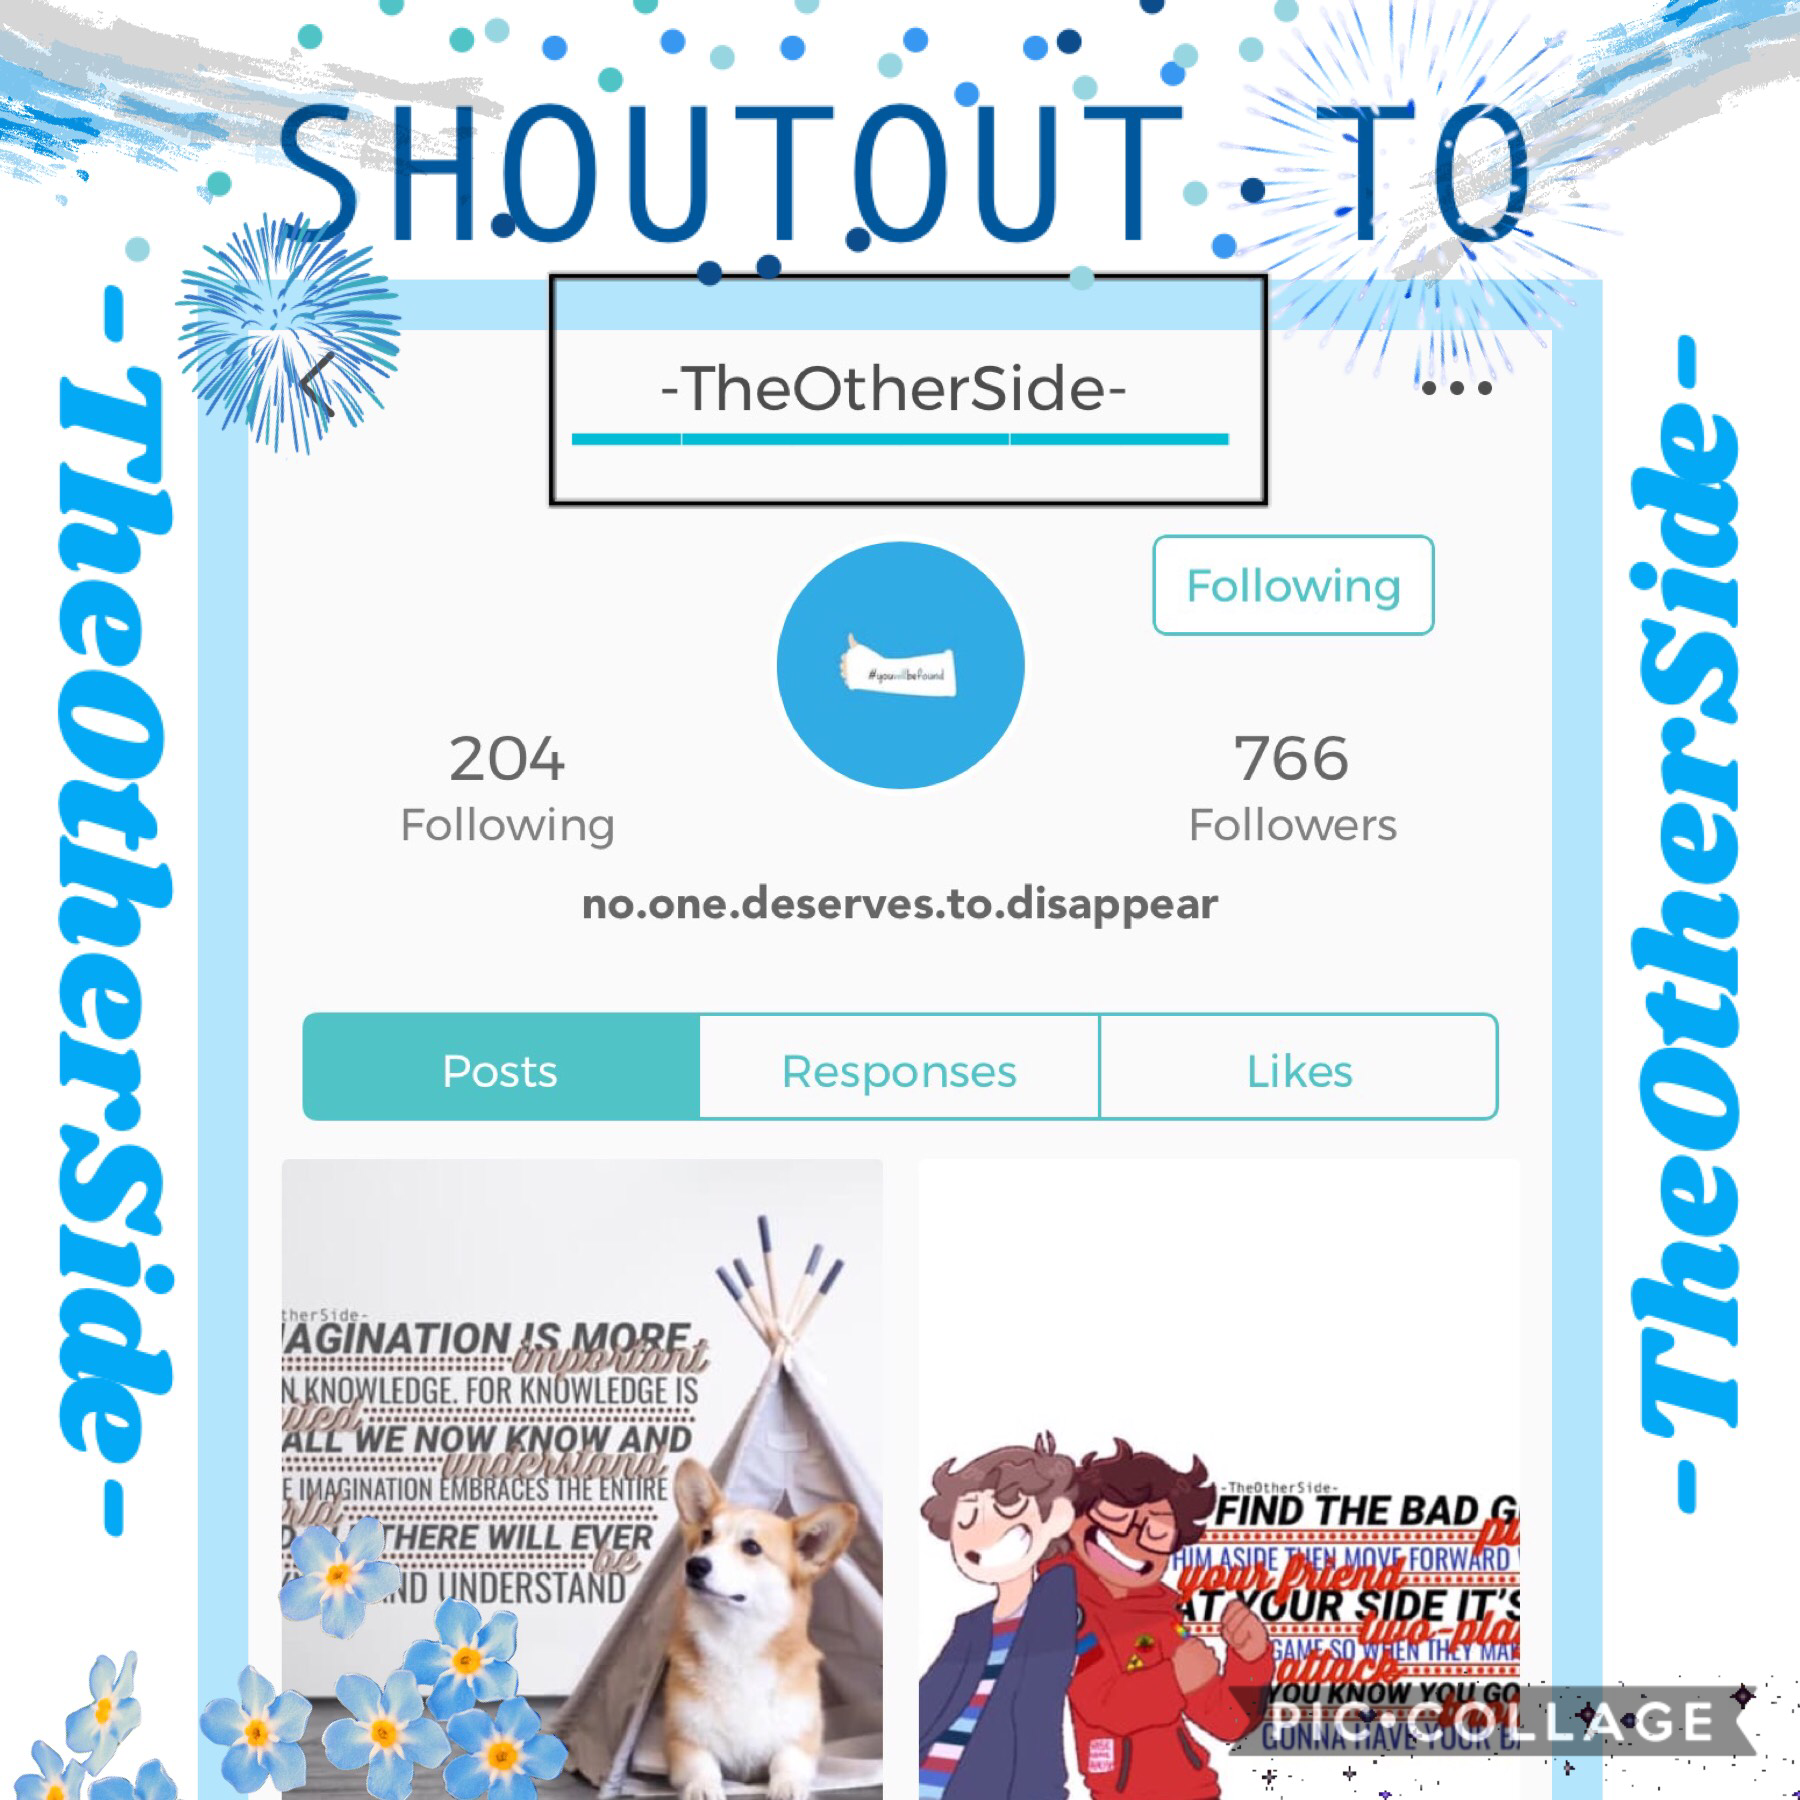 SHOUTOUT TO -TheOtherSide- CONGRATULATIONS FOR WINNING OUR GAMES!!🎉🎉